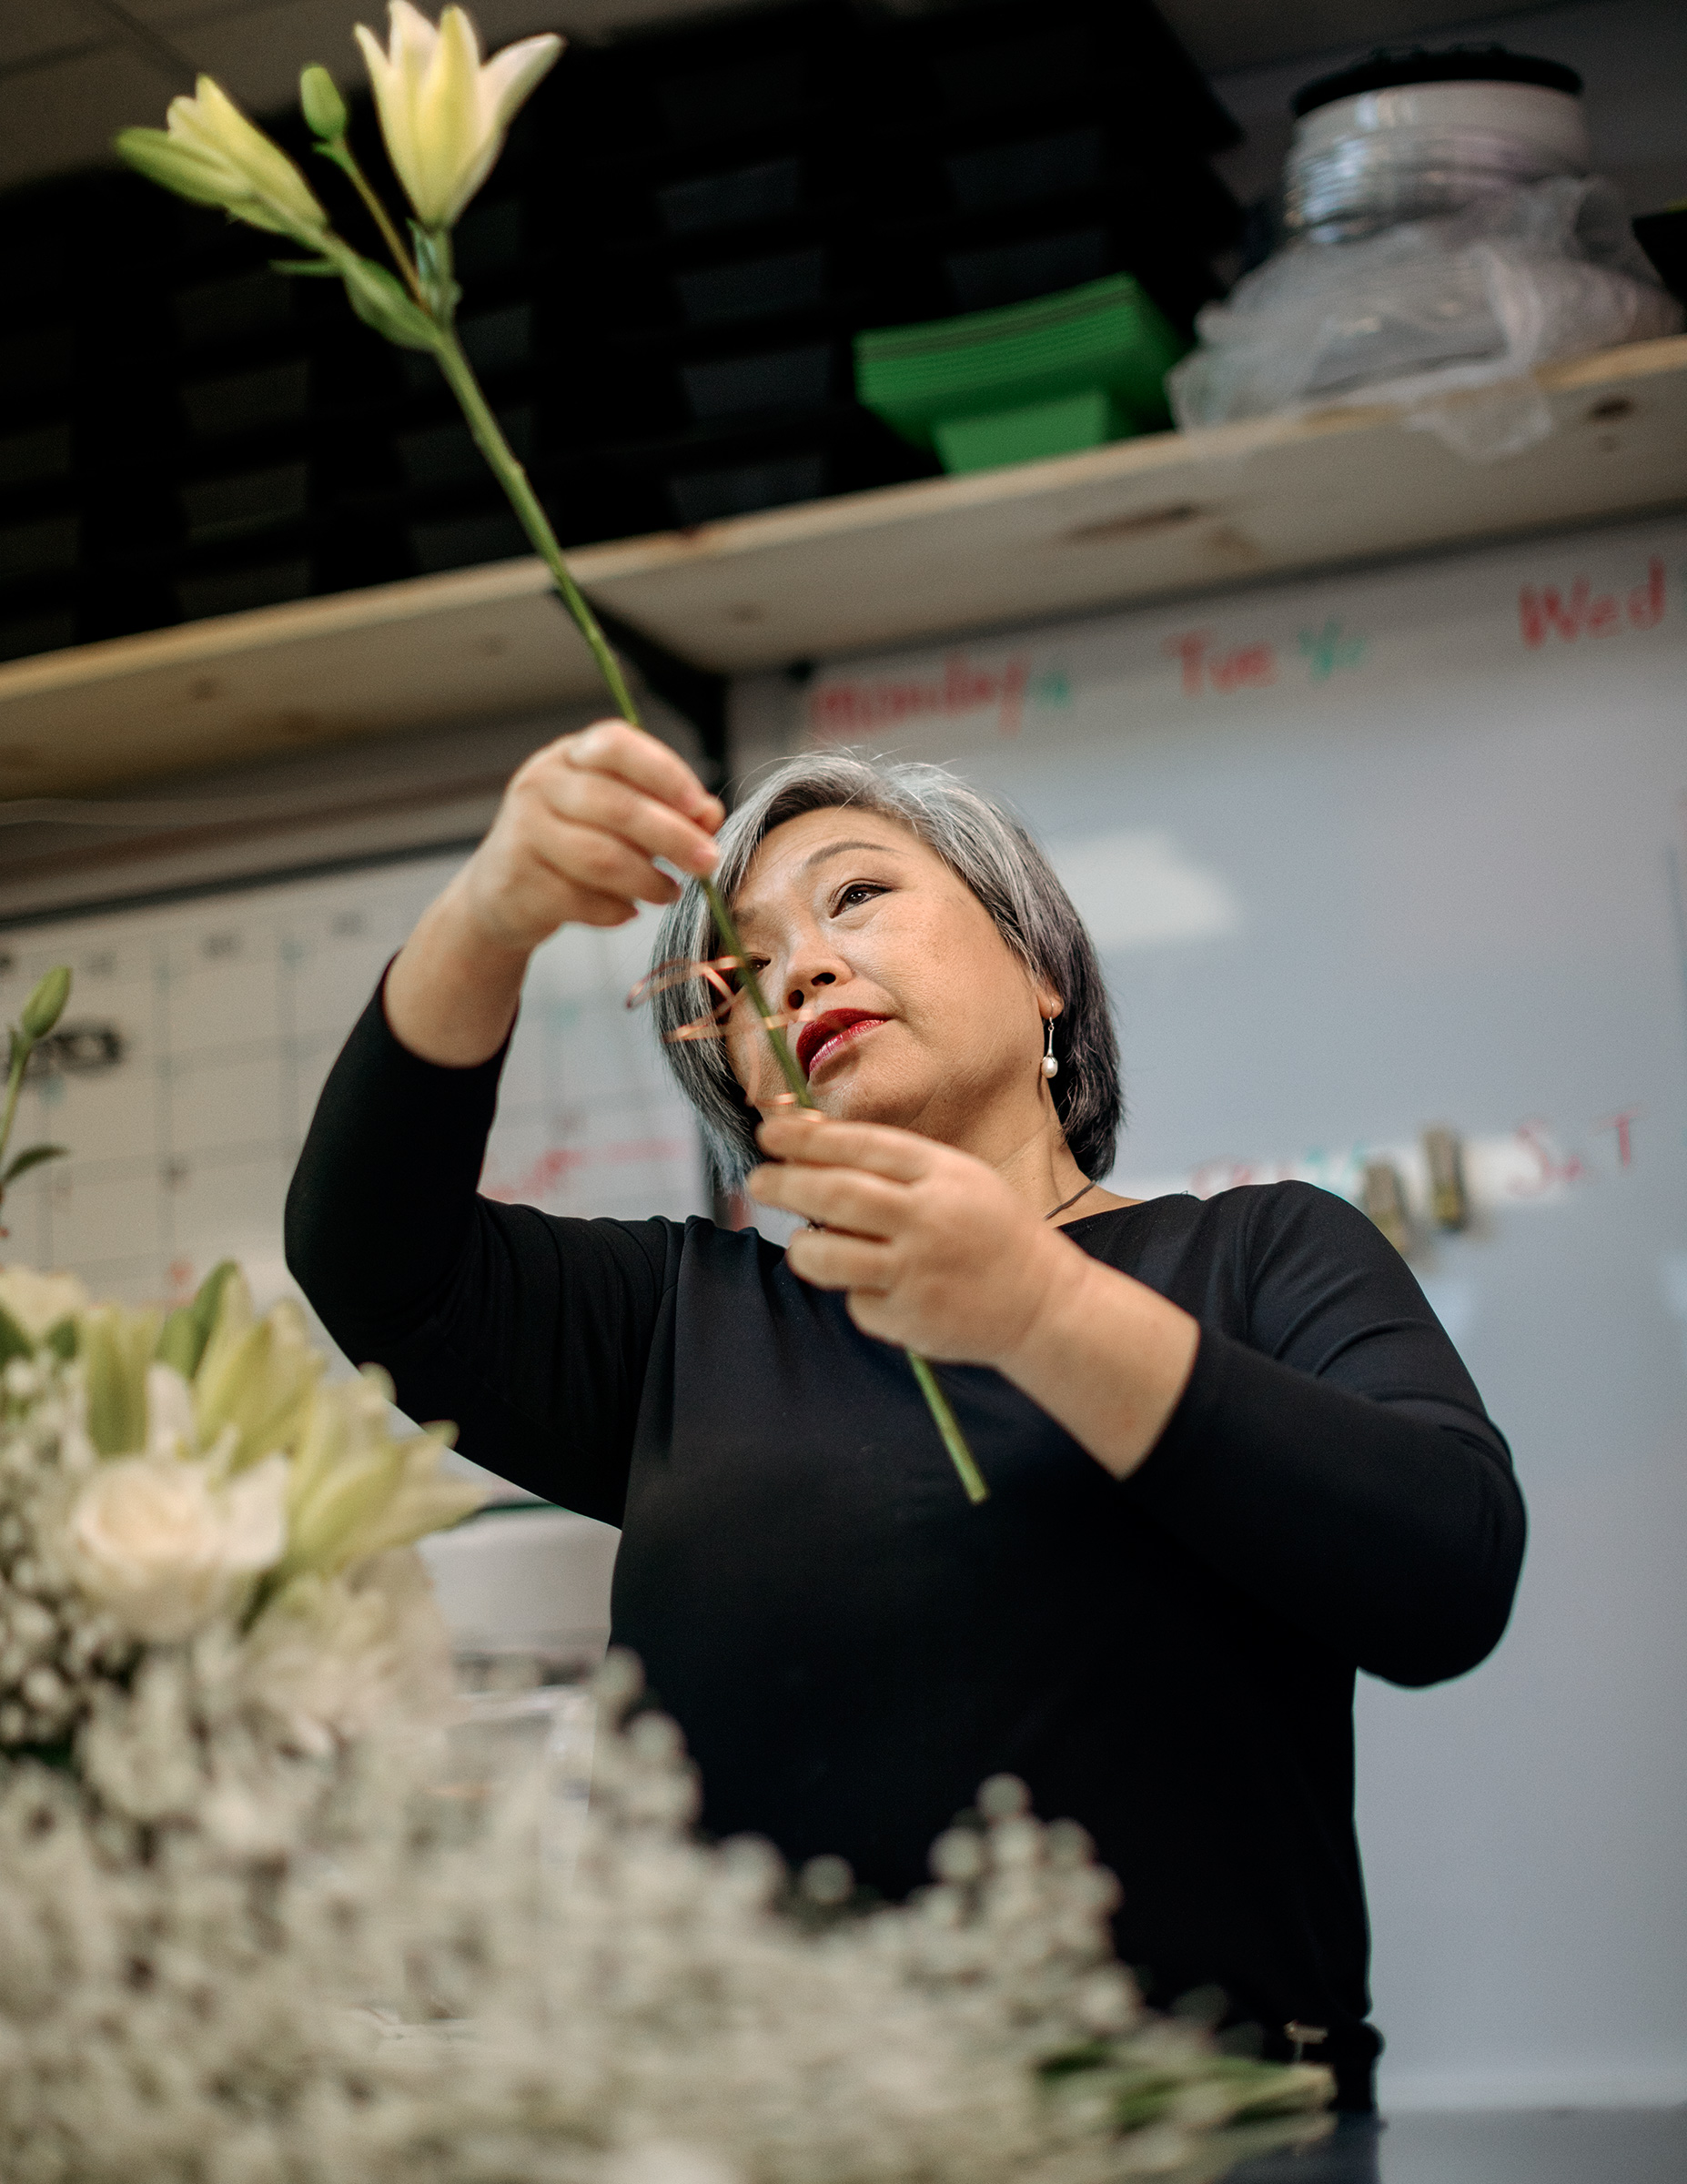 <strong>Eileen Cheng, 60, Florist, Fort Lauderdale, Fla.</strong> “Everything just went down to zero,” says Cheng, who has owned Yacht Flowers with her daughter since 2009. The shop primarily provided arrangements to private yachts, but few people are making use of luxury pleasure cruisers lately. Cheng is worried about what this could mean for her retirement: “I’m asking myself, Am I able to recover?” (Rose Marie Cromwell for TIME)